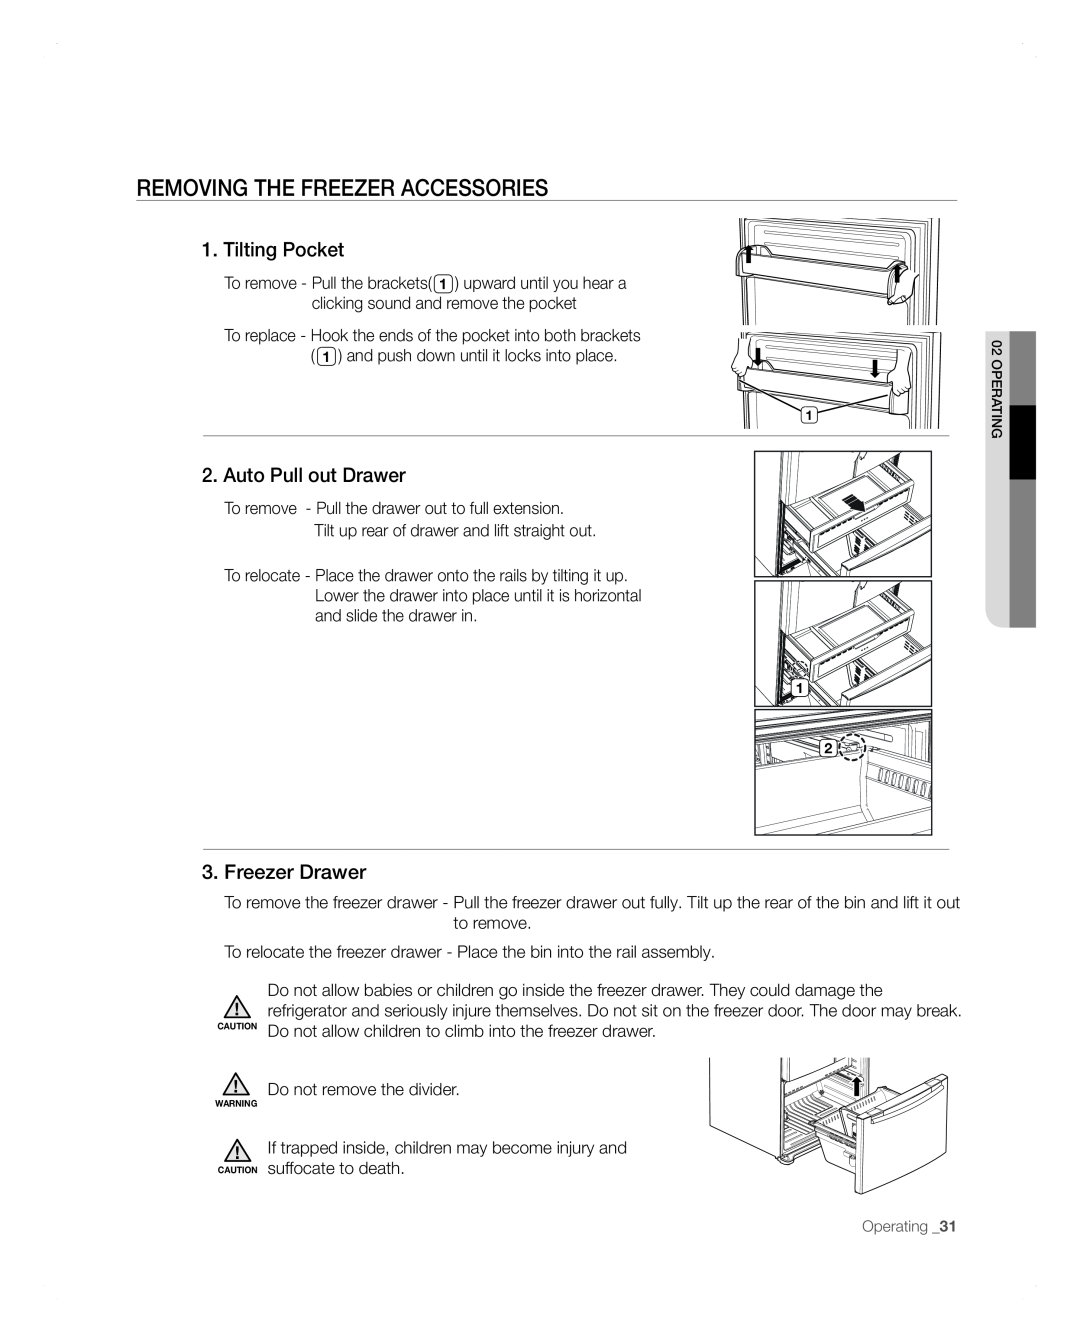 Samsung RFG297AARS user manual Removing The Freezer Accessories, Tilting Pocket, Auto Pull out Drawer, Freezer Drawer 